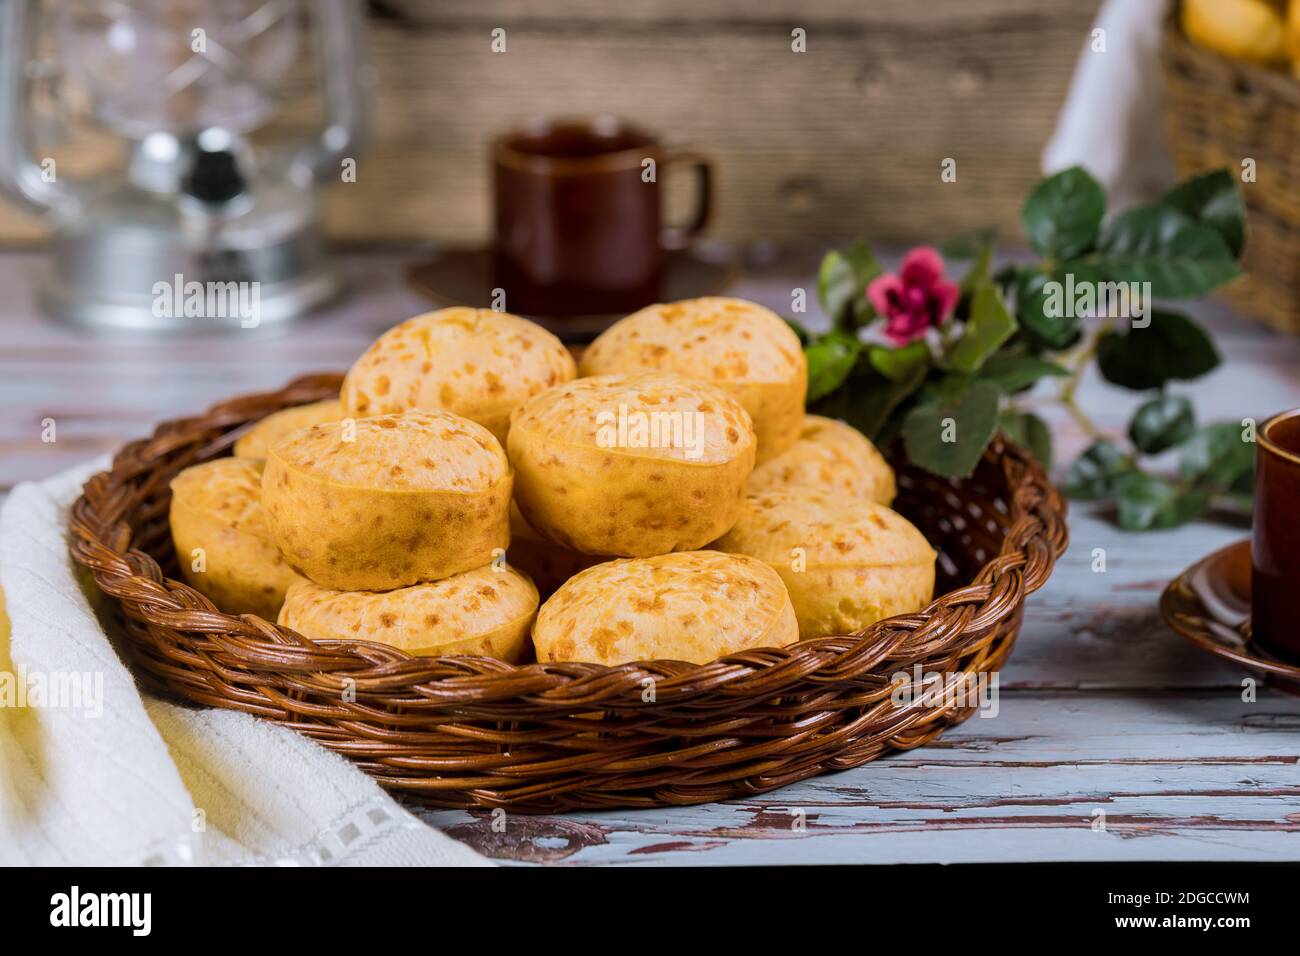 Cheese bread, chipa with coffee and flowers. Stock Photo